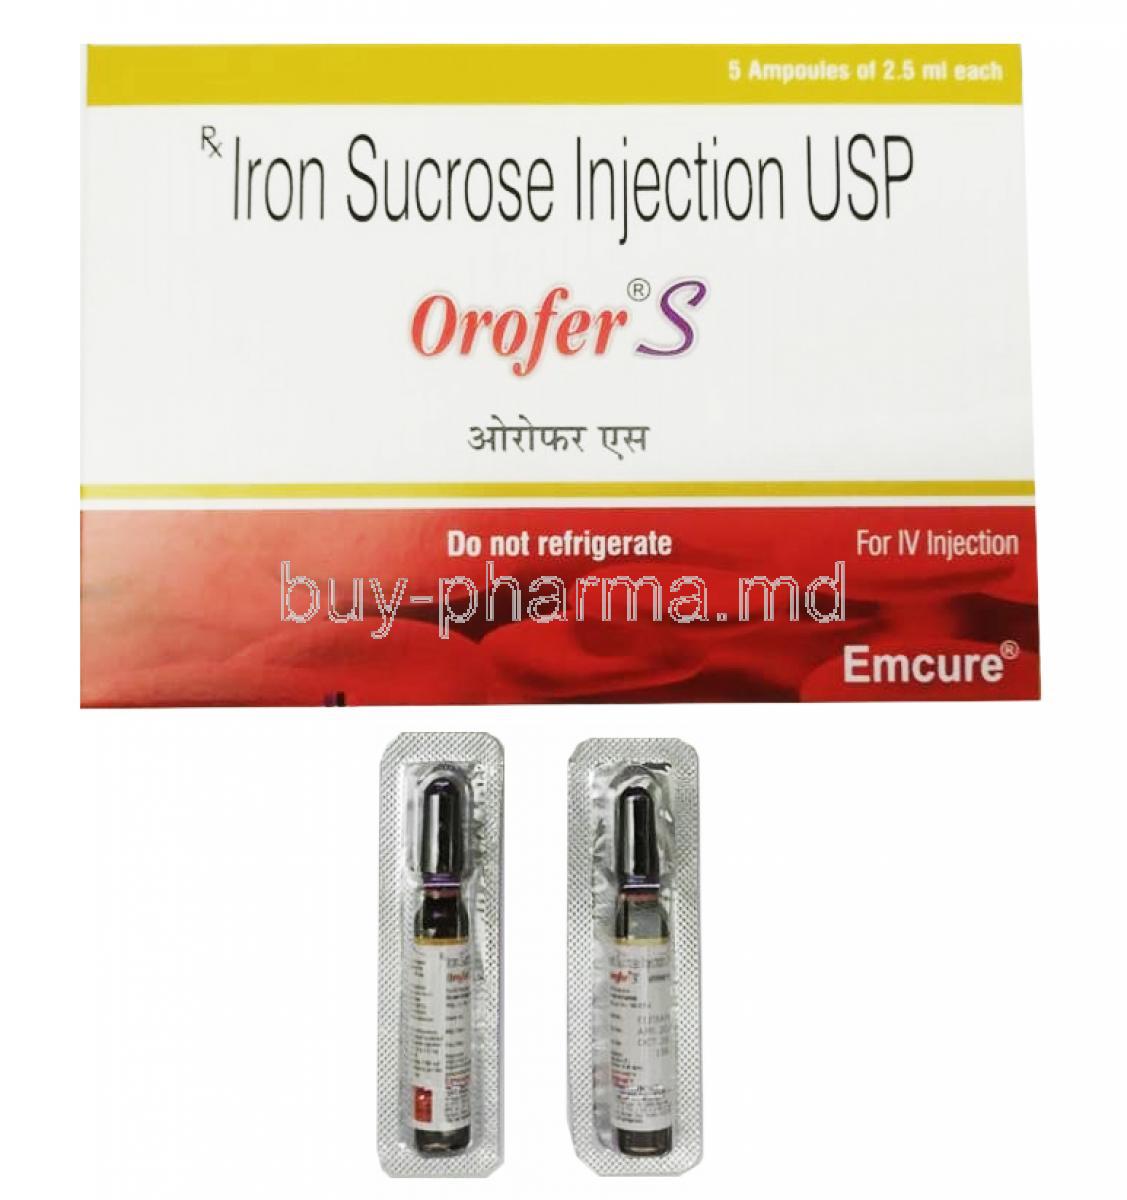 Orofer S Injection, Iron 20mg box and ampoule